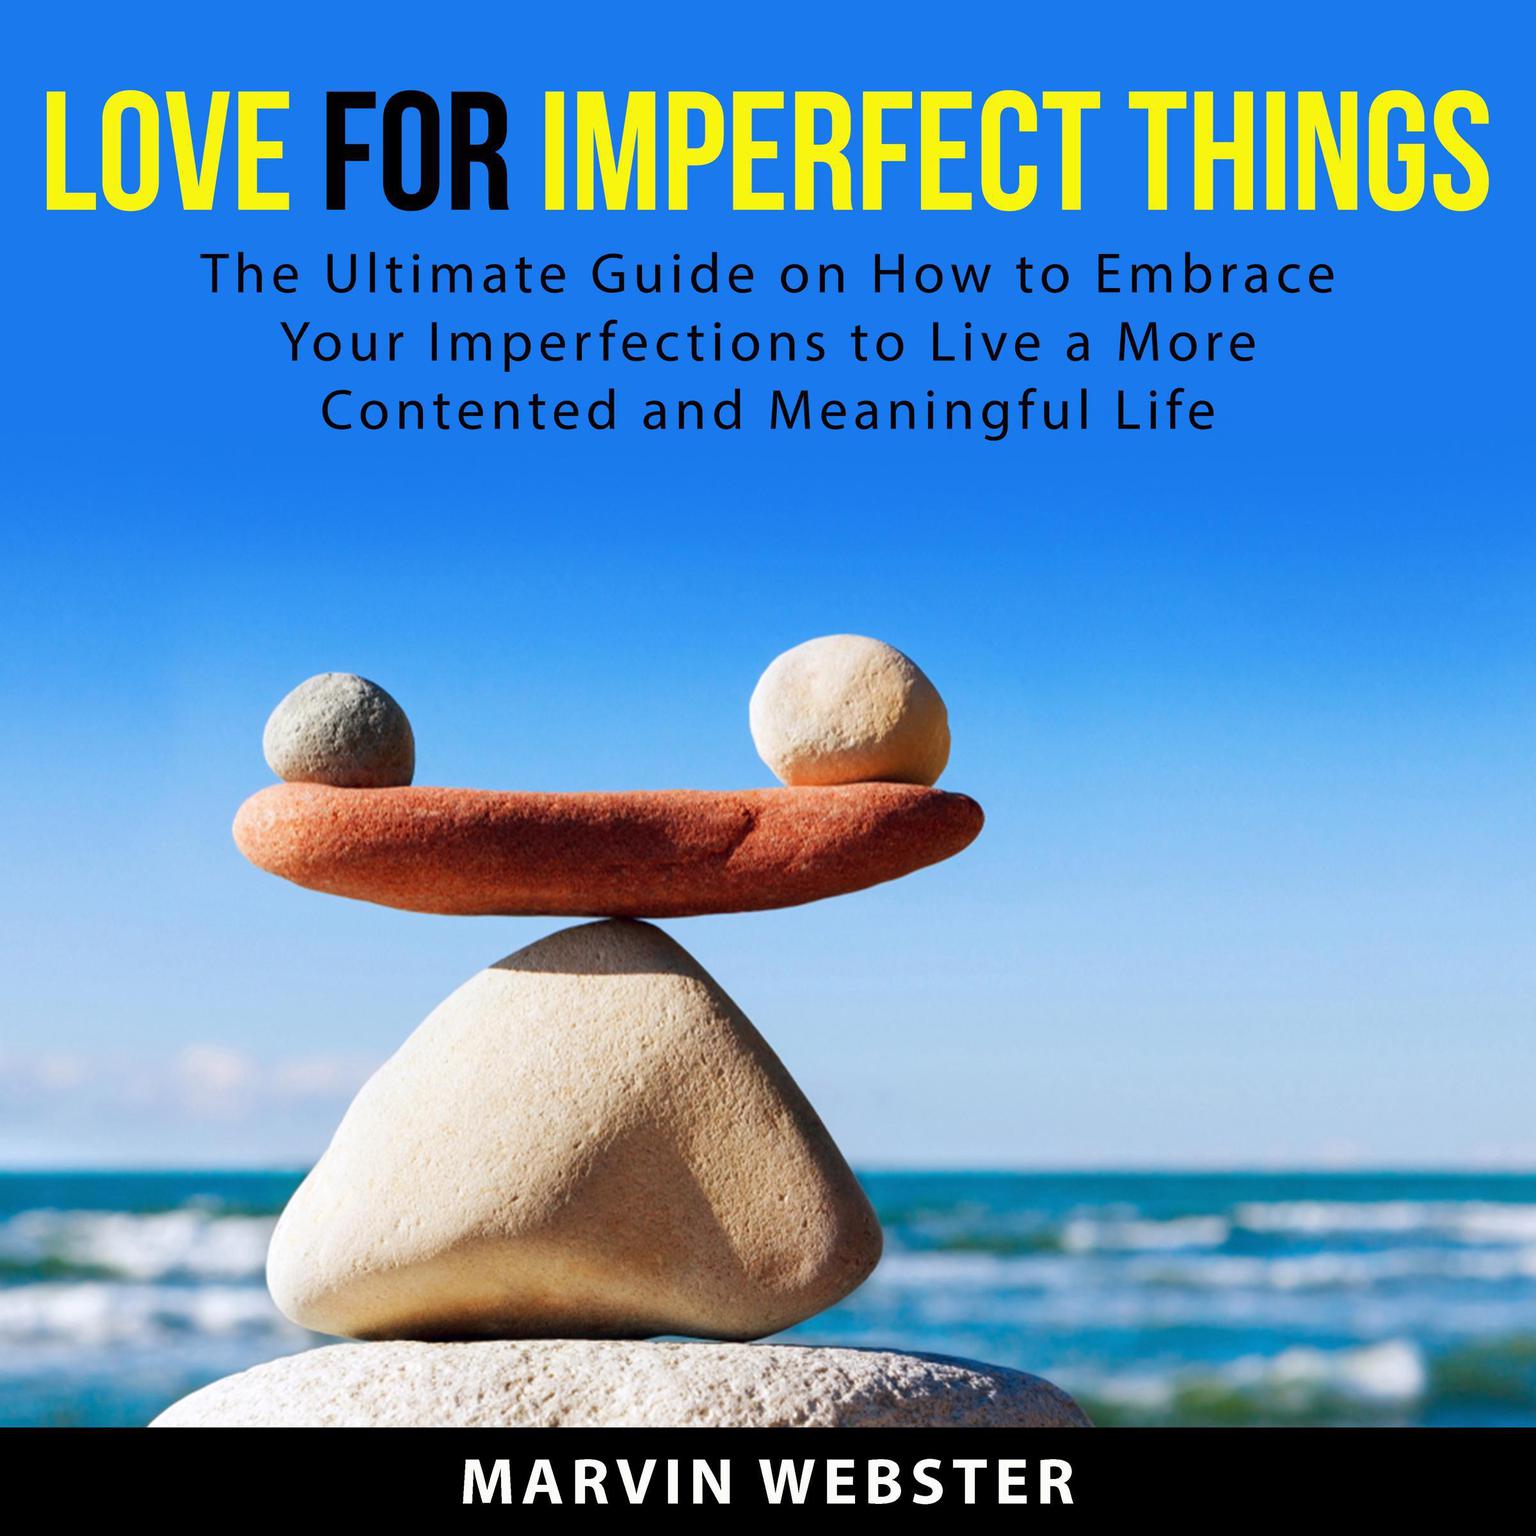 Love for Imperfect Things: The Ultimate Guide on How to Embrace Your Imperfections to Live a More Contented and Meaningful Life: The Ultimate Guide on How to Embrace Your Imperfections to Live a More Contented and Meaningful Life  Audiobook, by Marvin Webster